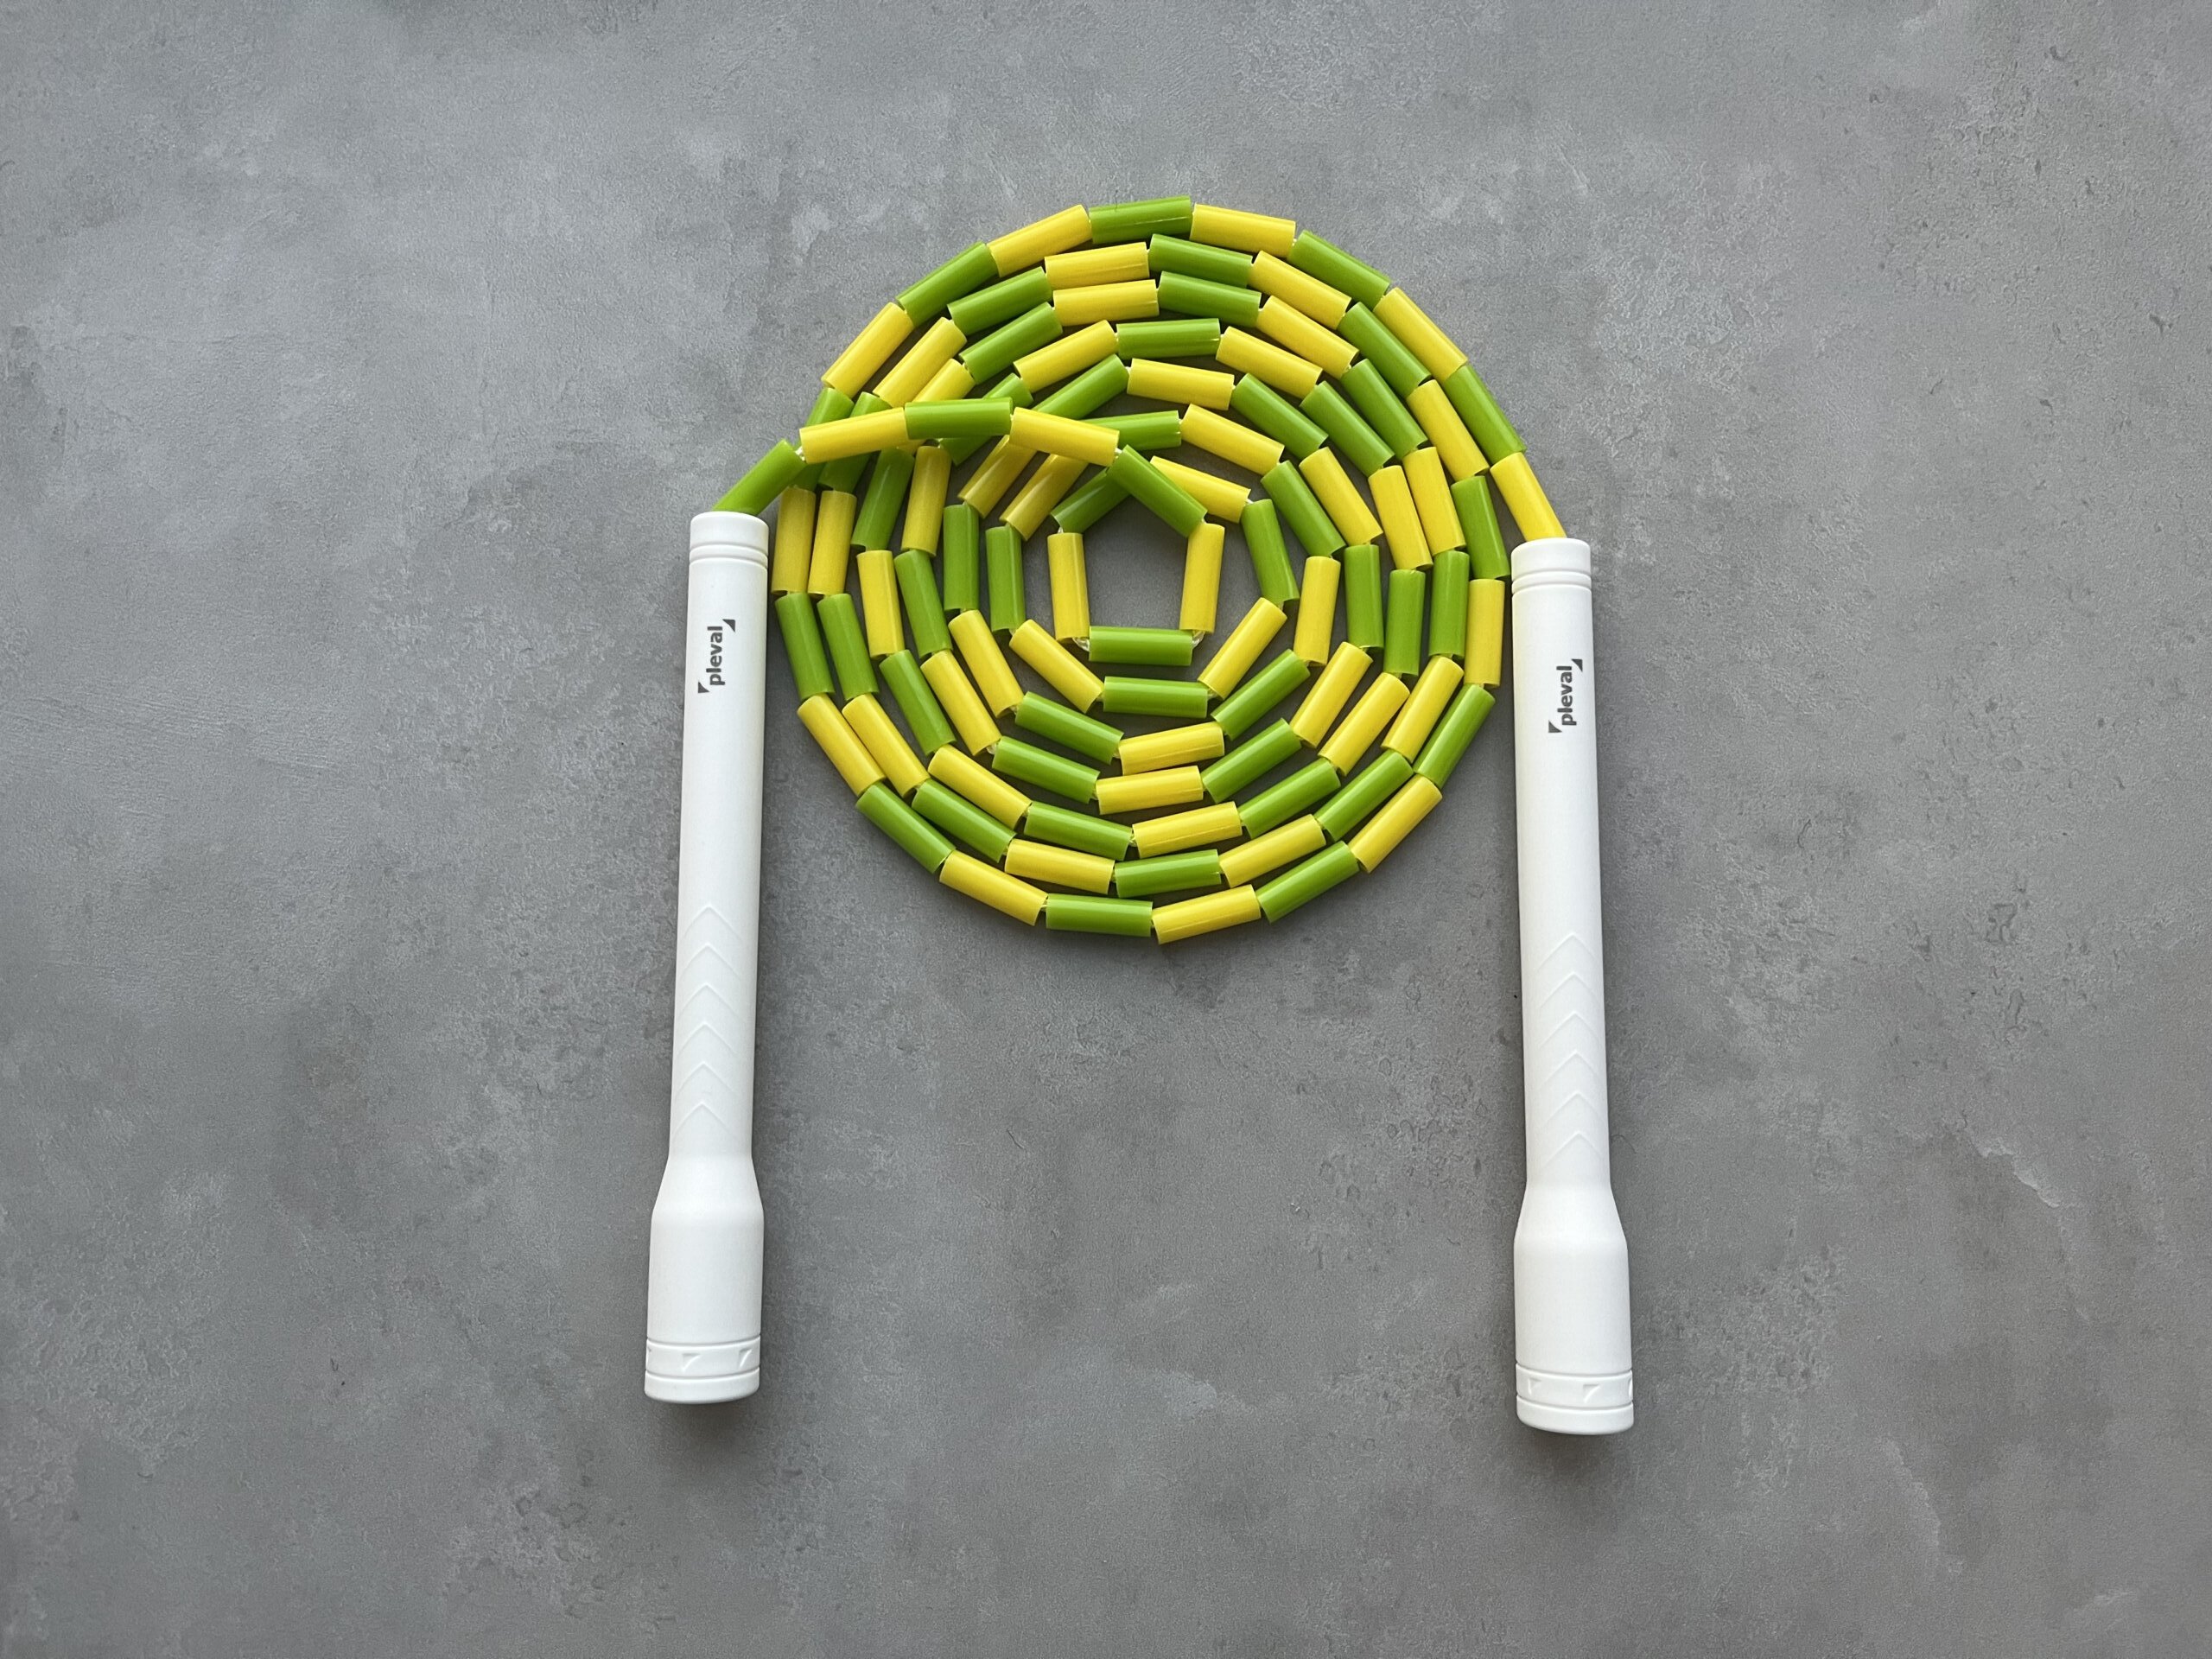 Short Handle 25mm Beaded Jump Rope YELLOW BUTTERCUP 2(pleval.倍乐活)